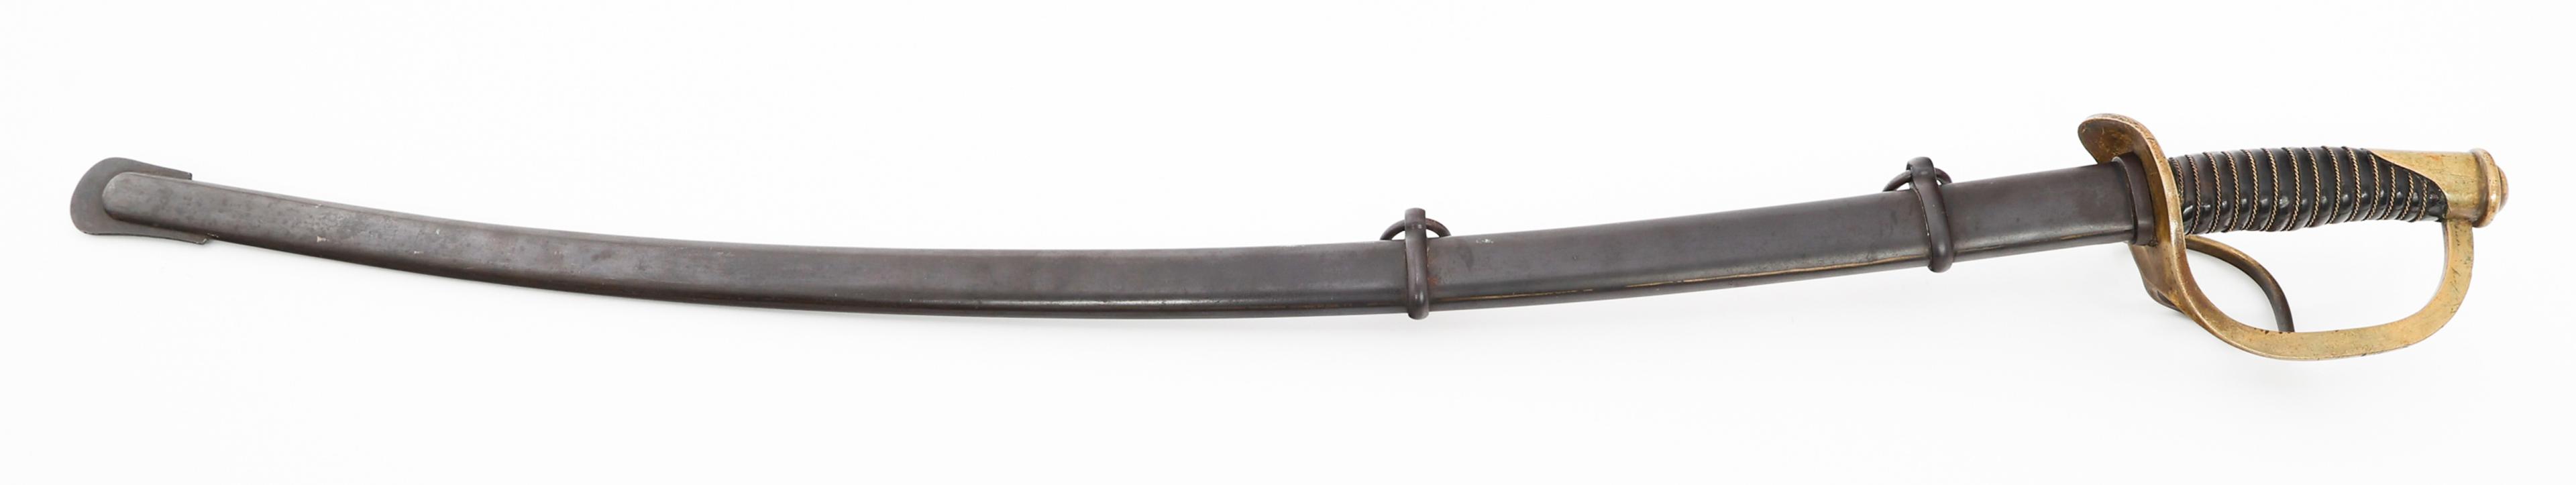 CIVIL WAR US M1860 CAVALRY SWORD by C. ROBY